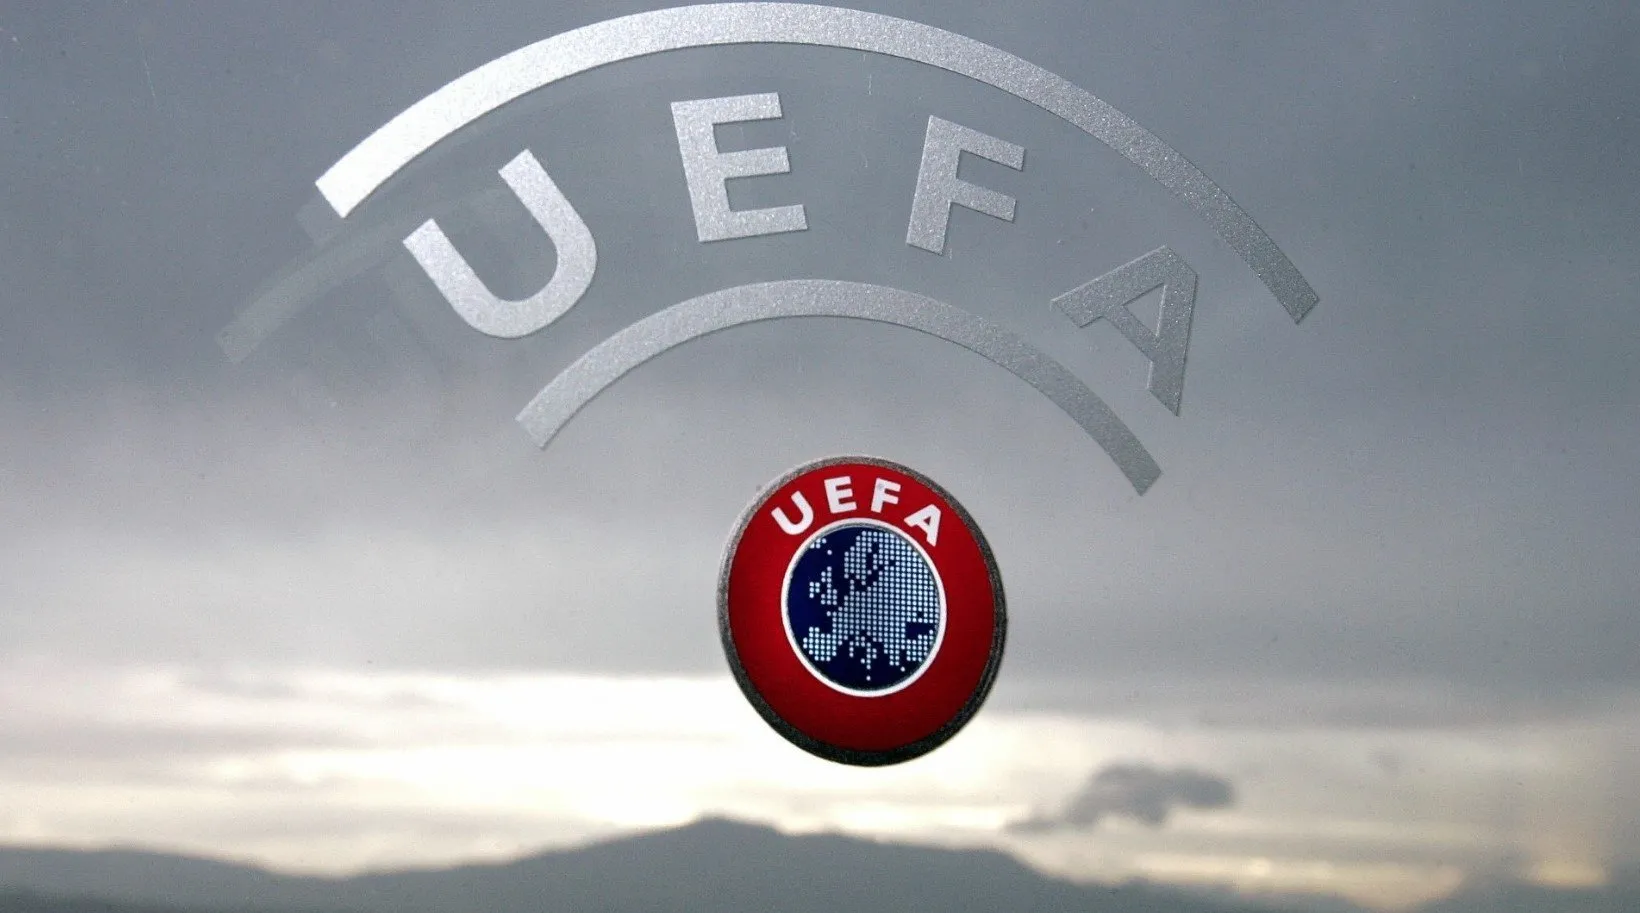 Türkiye’s UEFA Country Score Rankings: Updates after Champions League and Conference League Matches